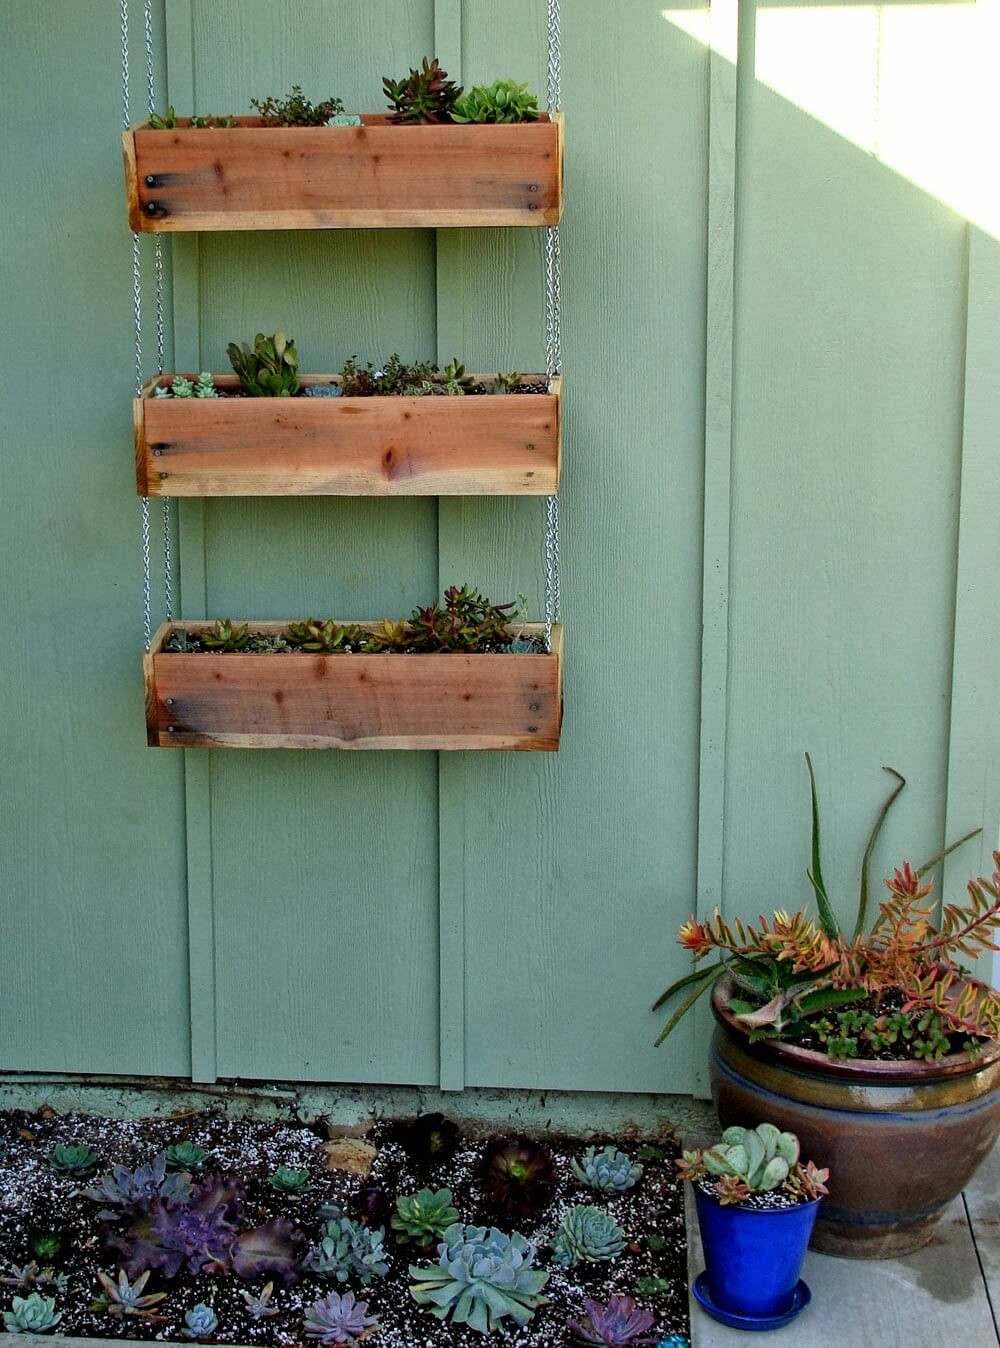 DIY Outdoor Hanging Planter
 DIY Tiered Hanging Planter Boxes in 2019